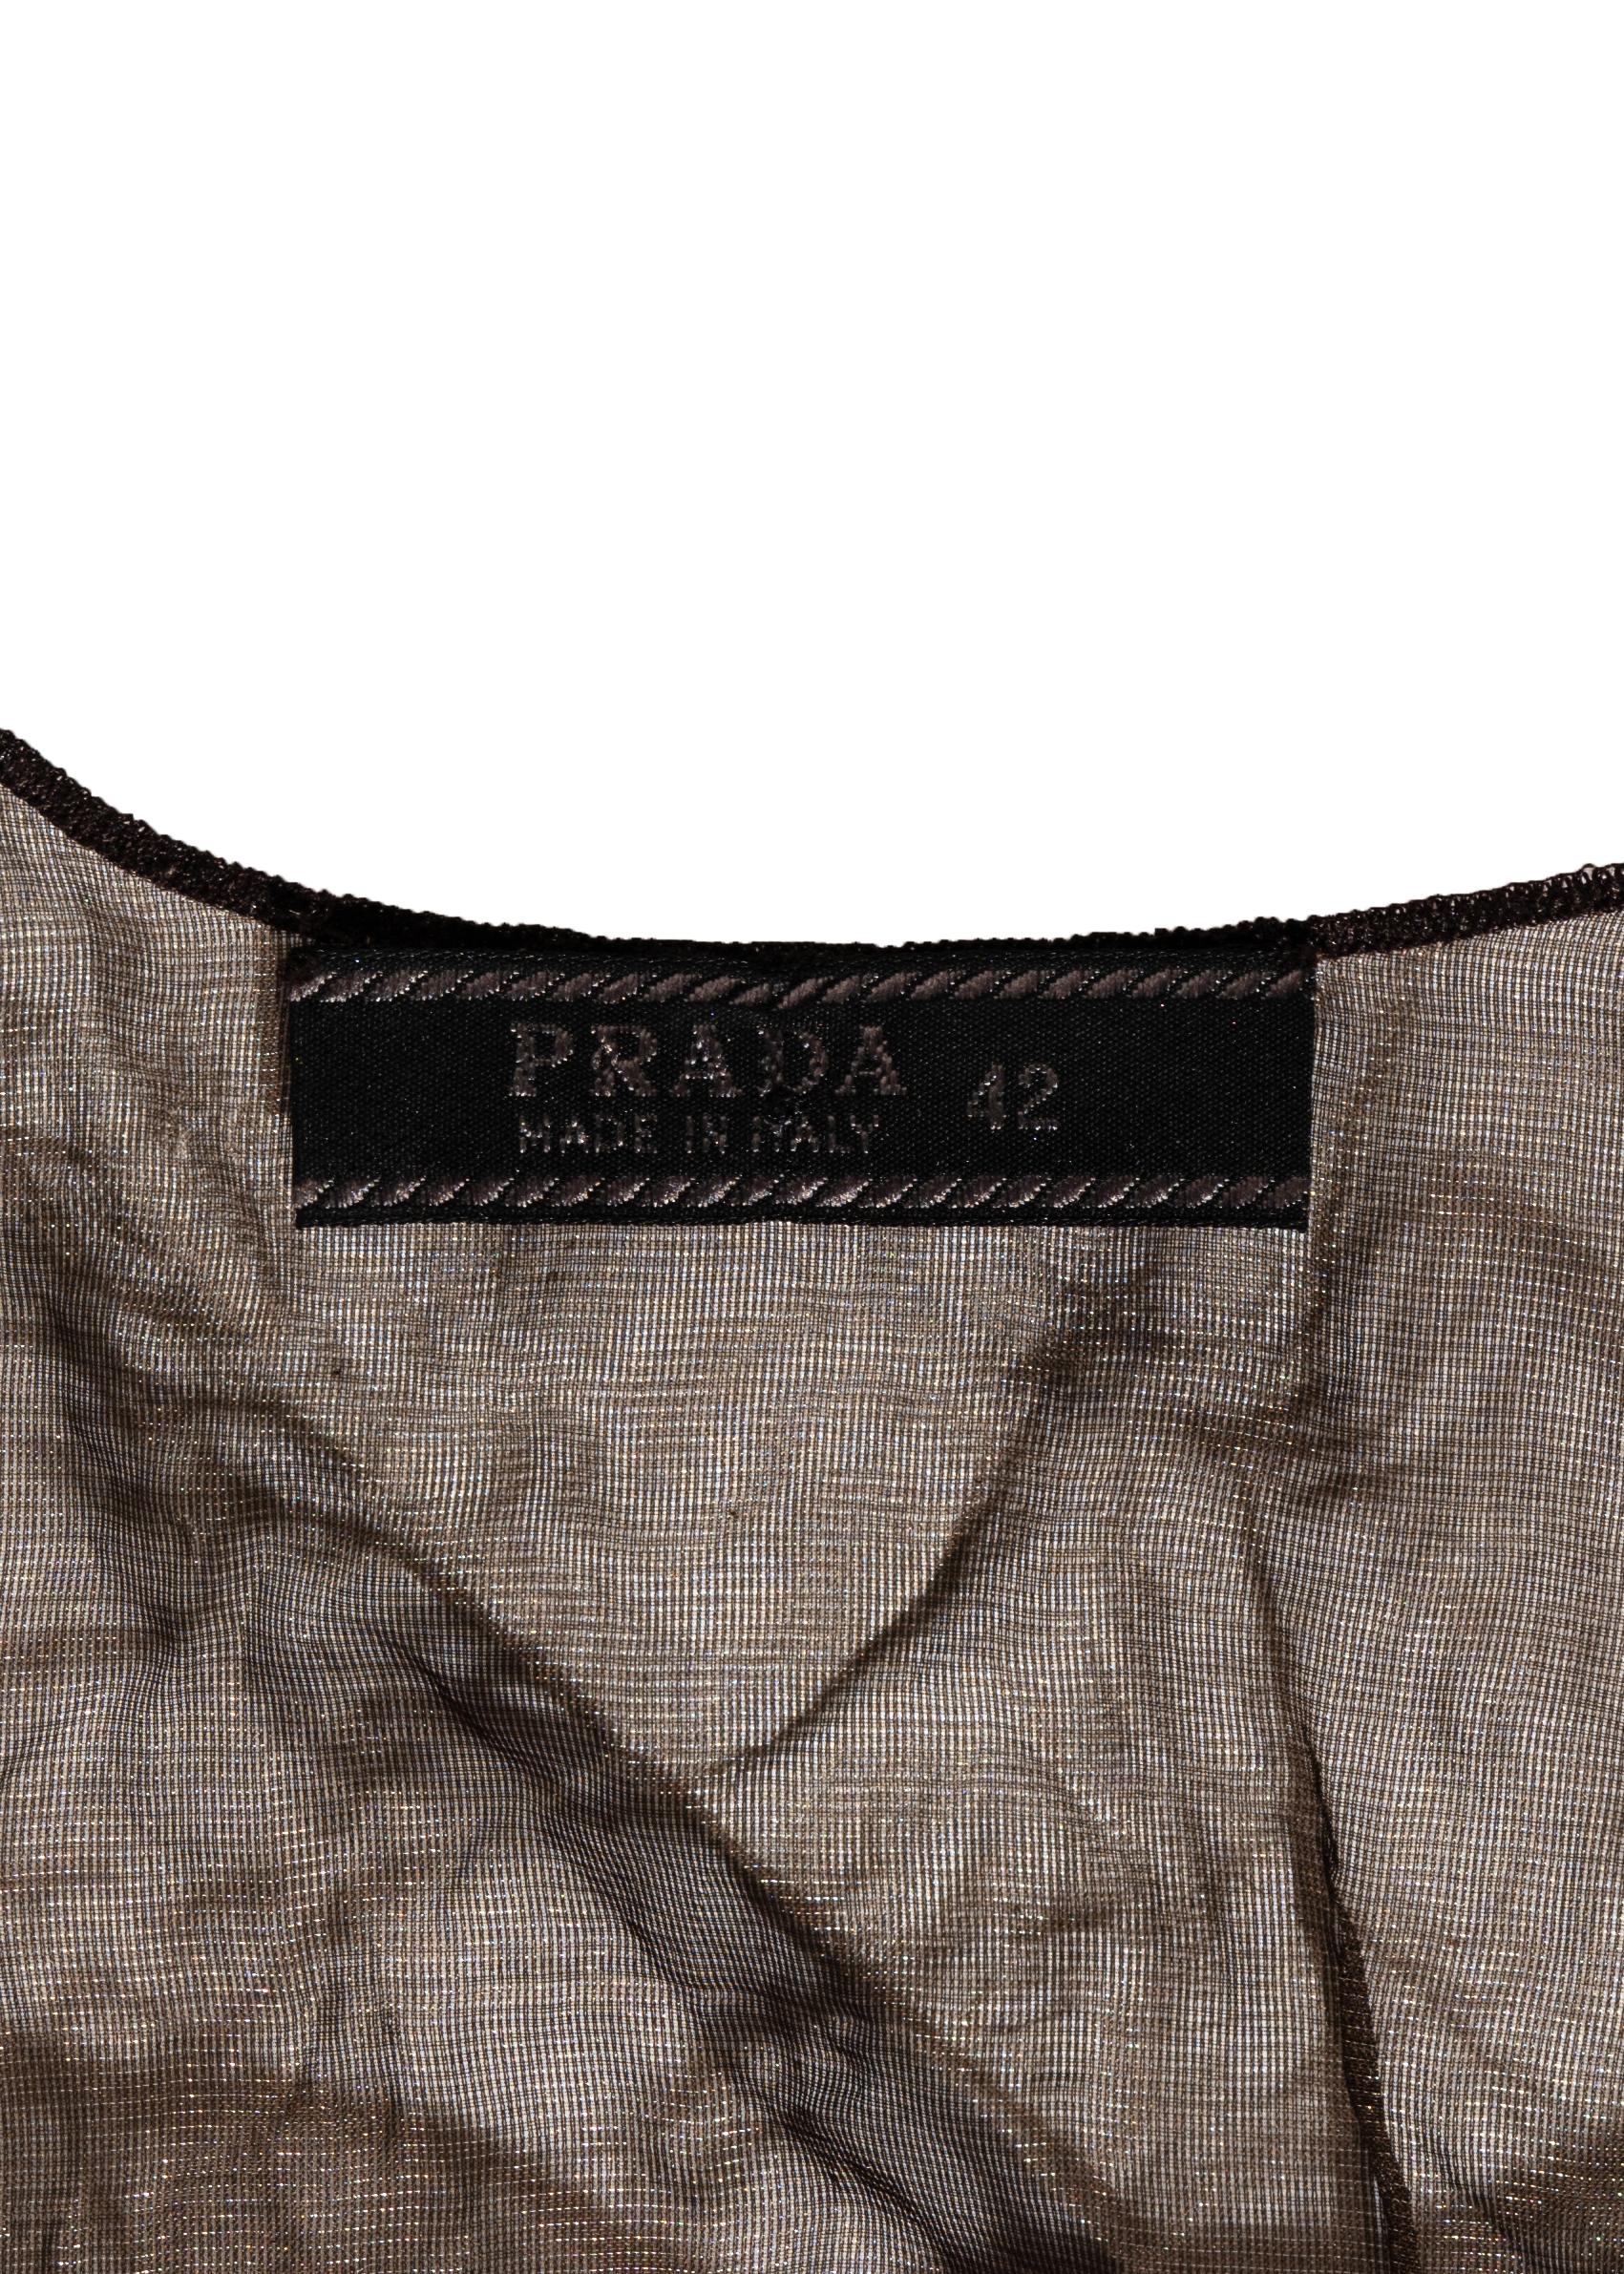 Prada olive crinkled silk organza and leather vest and skirt set, ss 1999 2